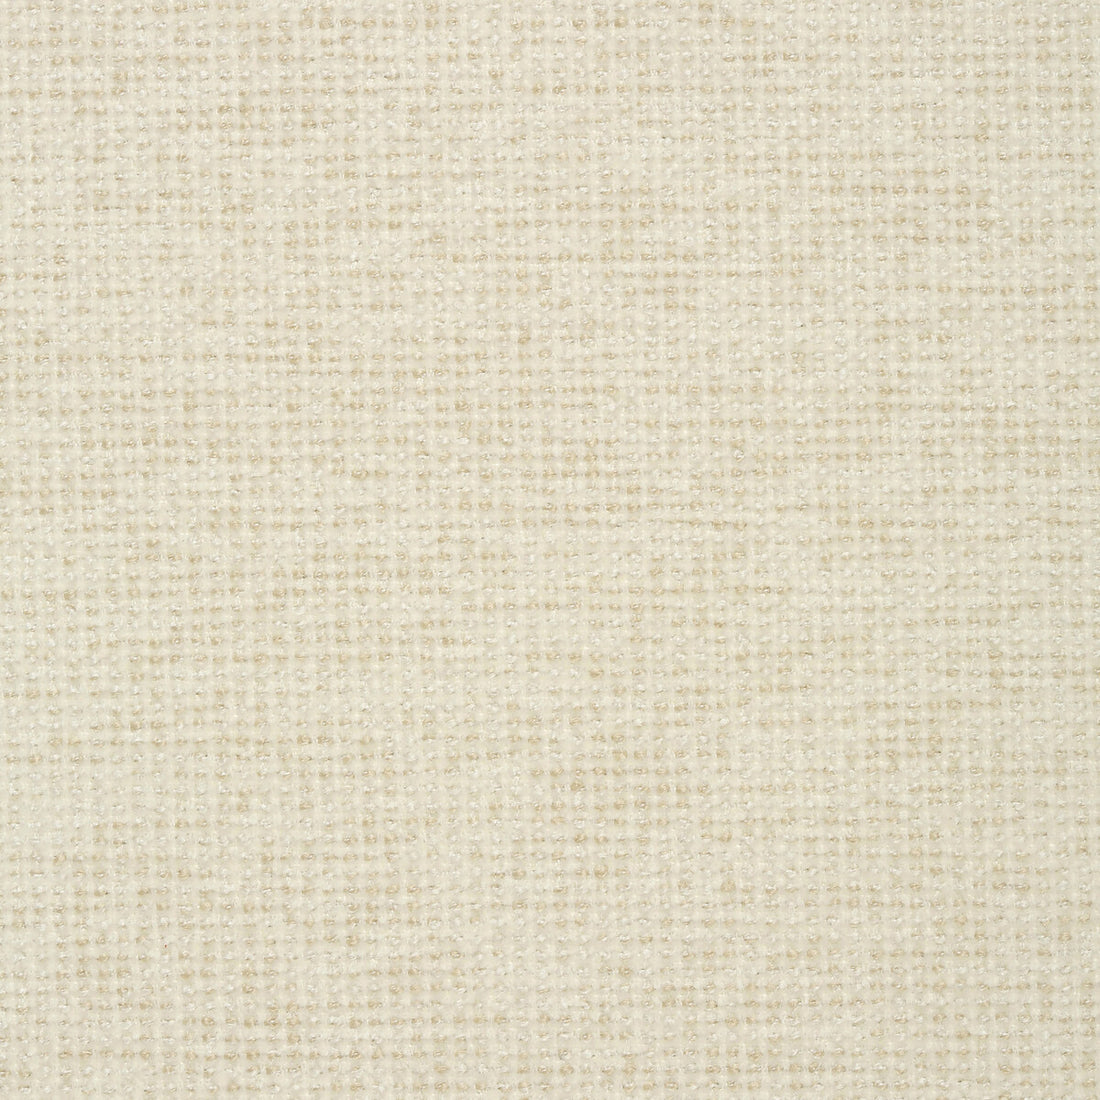 Kravet Smart fabric in 35115-111 color - pattern 35115.111.0 - by Kravet Smart in the Crypton Home collection